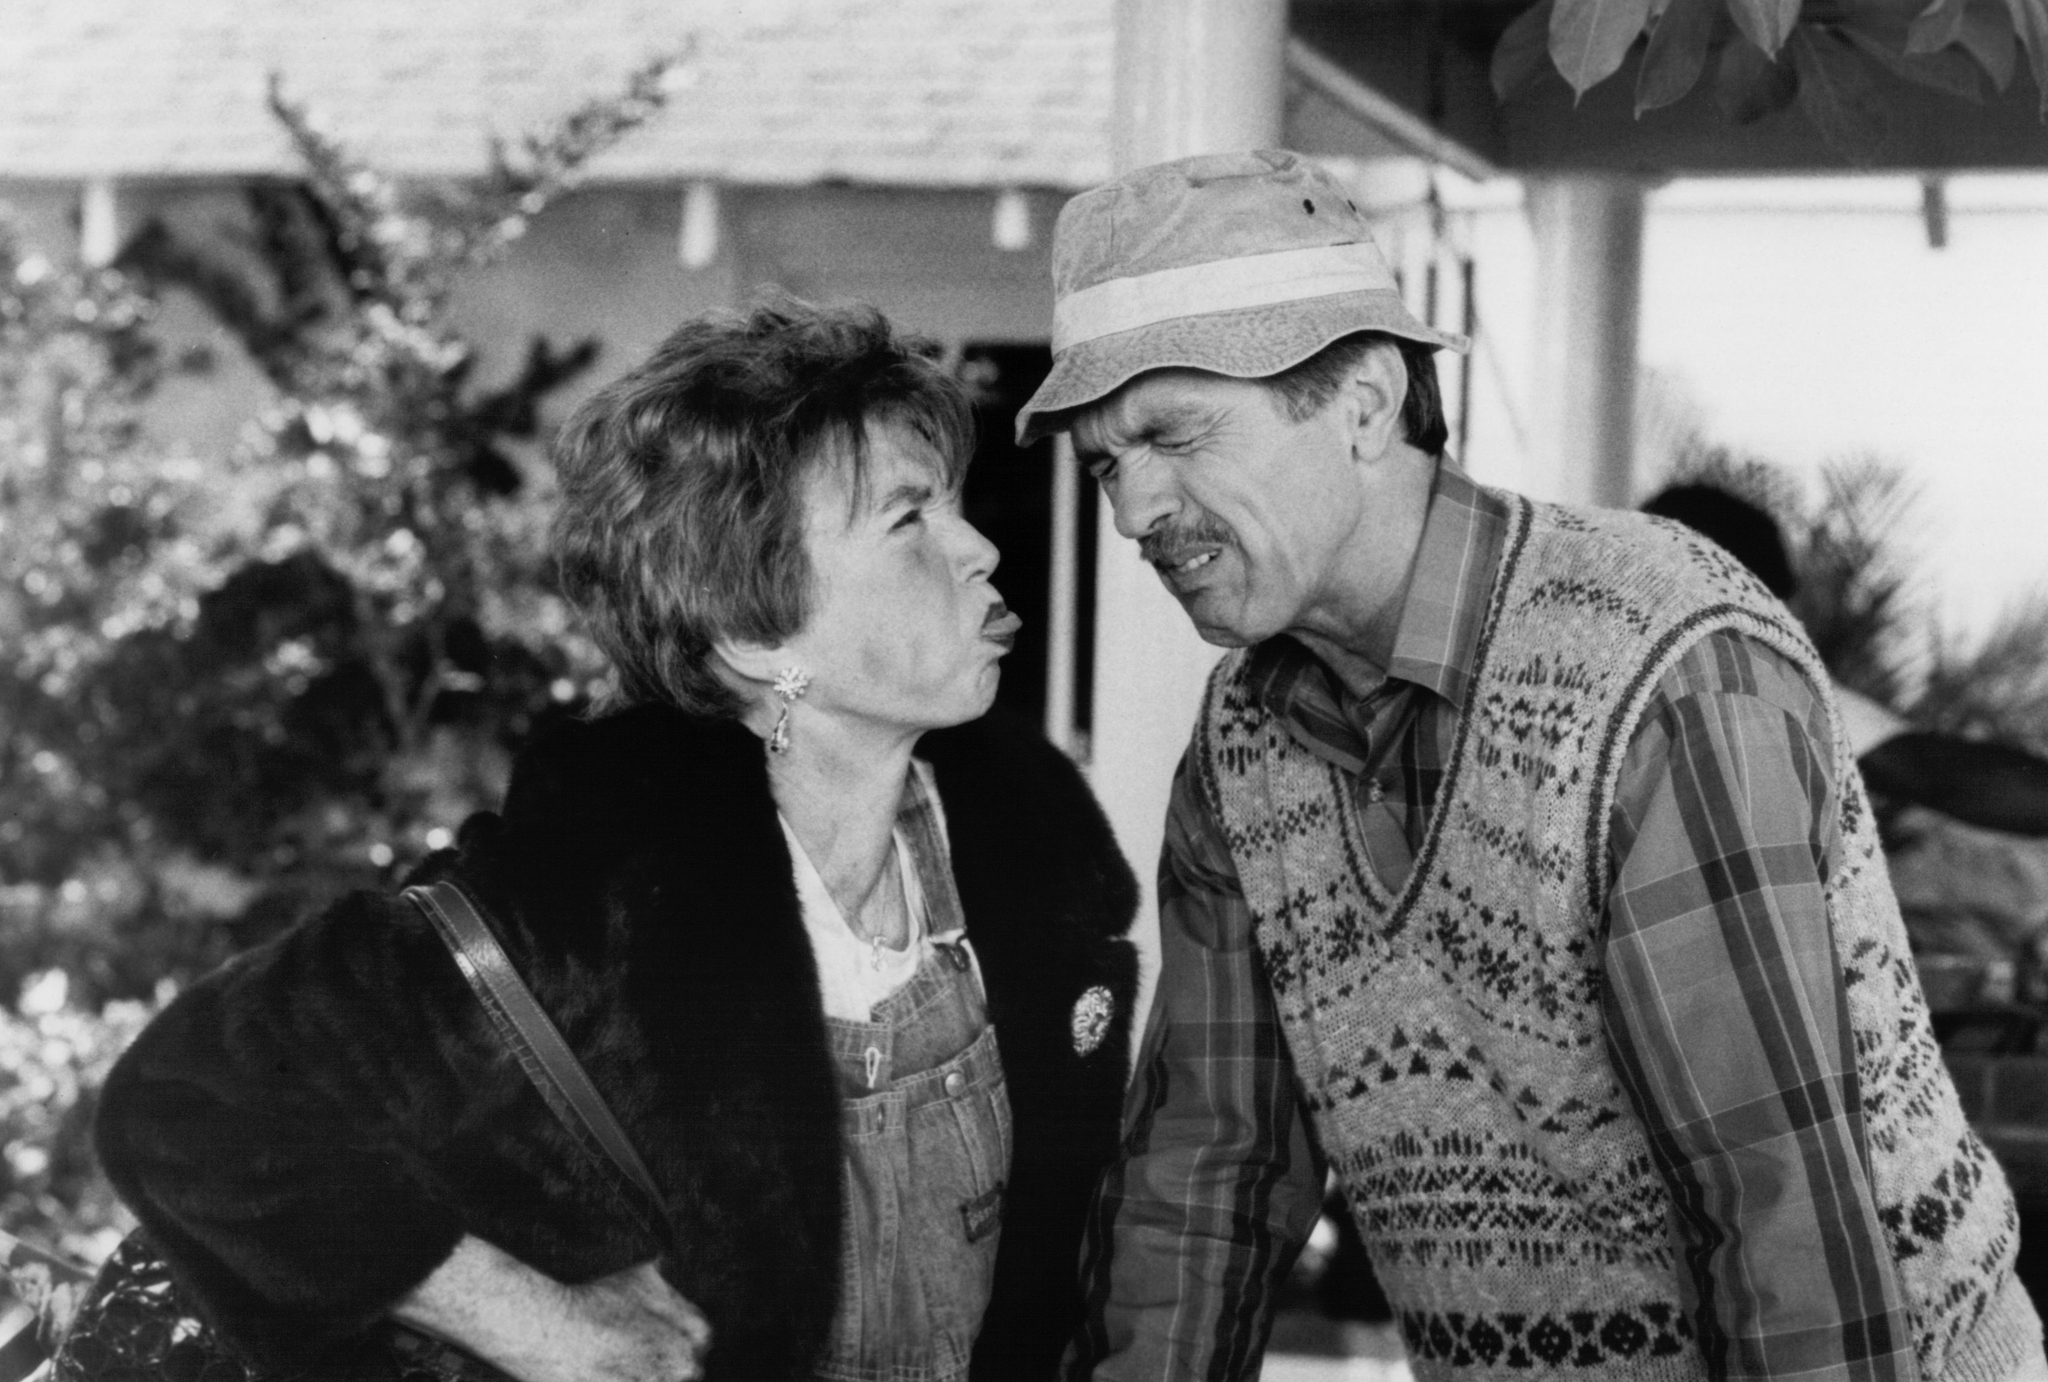 Still of Shirley MacLaine and Tom Skerritt in Steel Magnolias (1989)